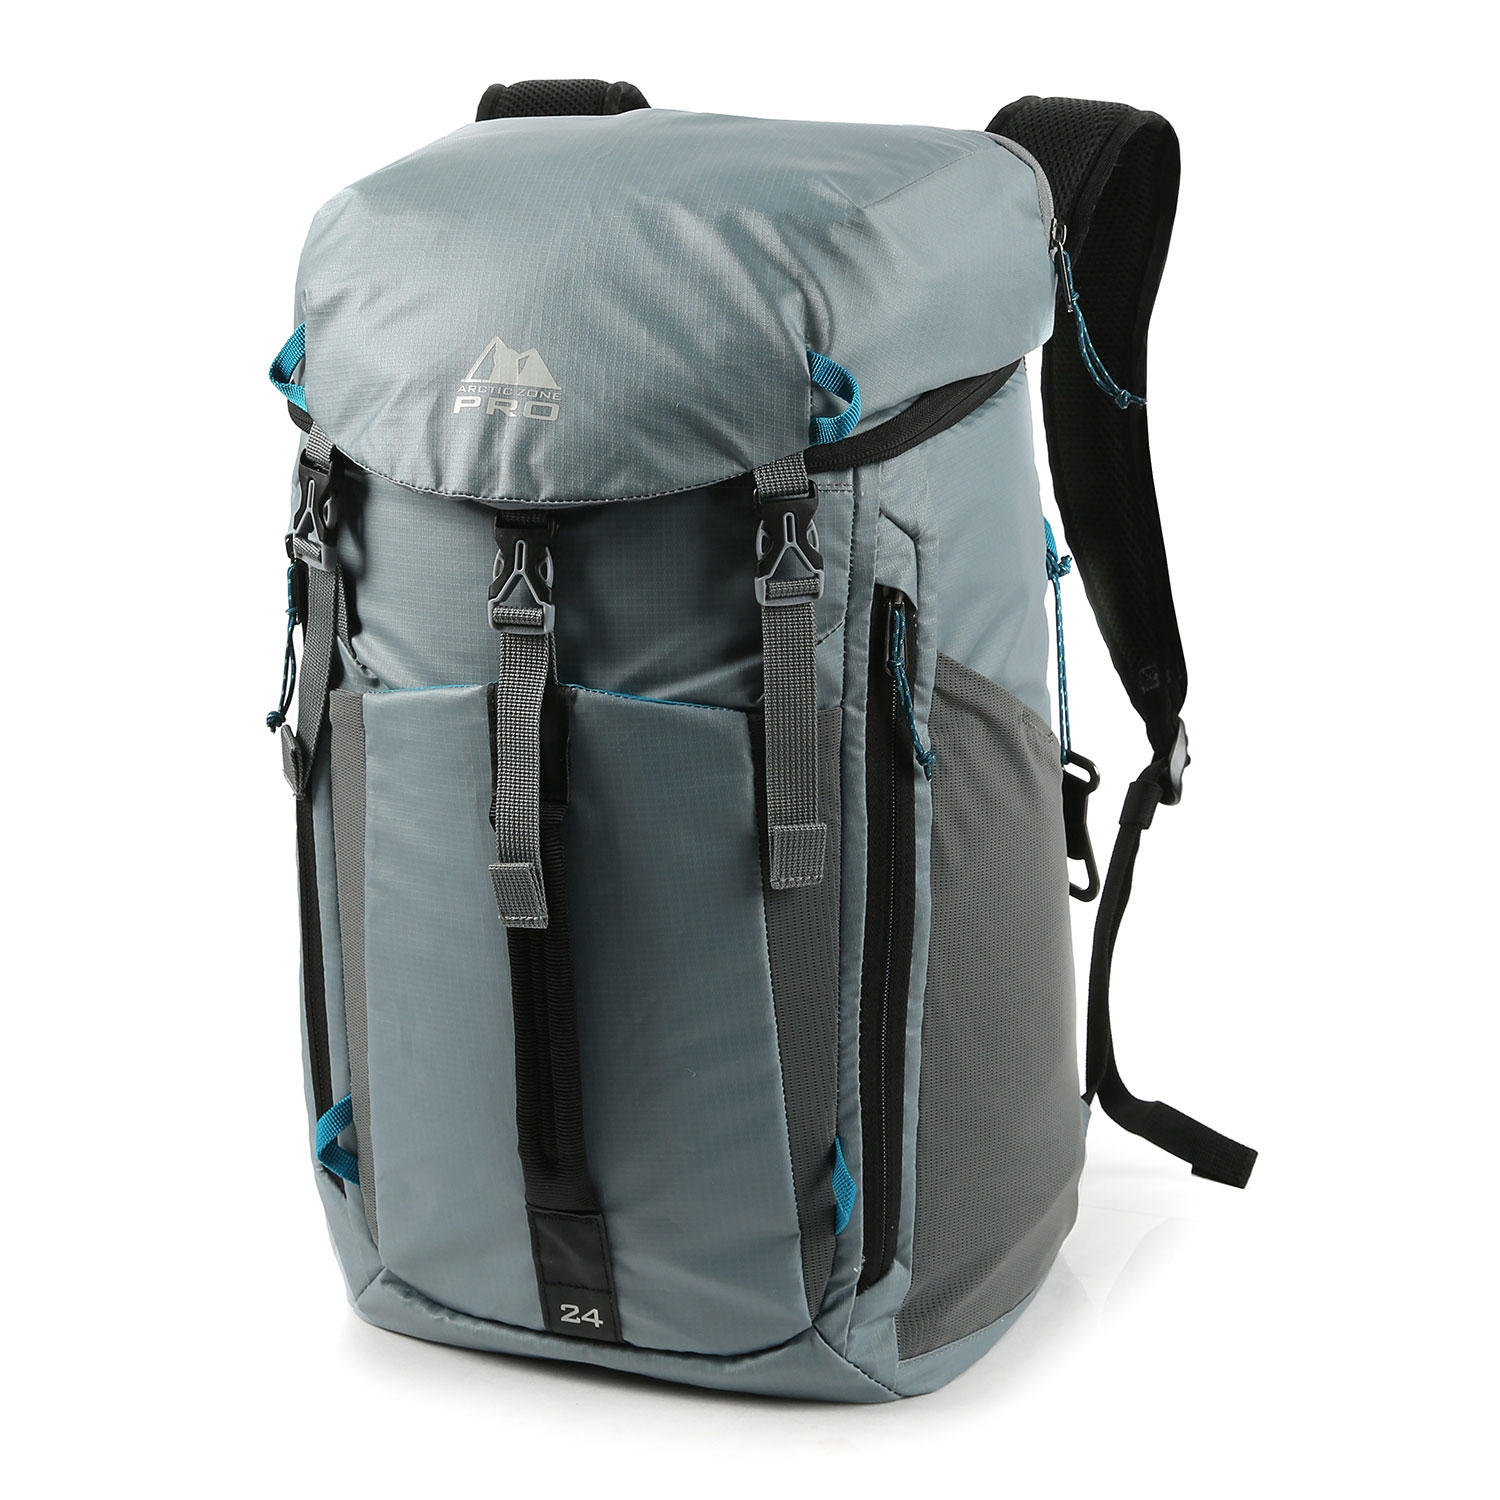 Arctic Zone Pro 24 Can Backpack Cooler - Lunar Grey